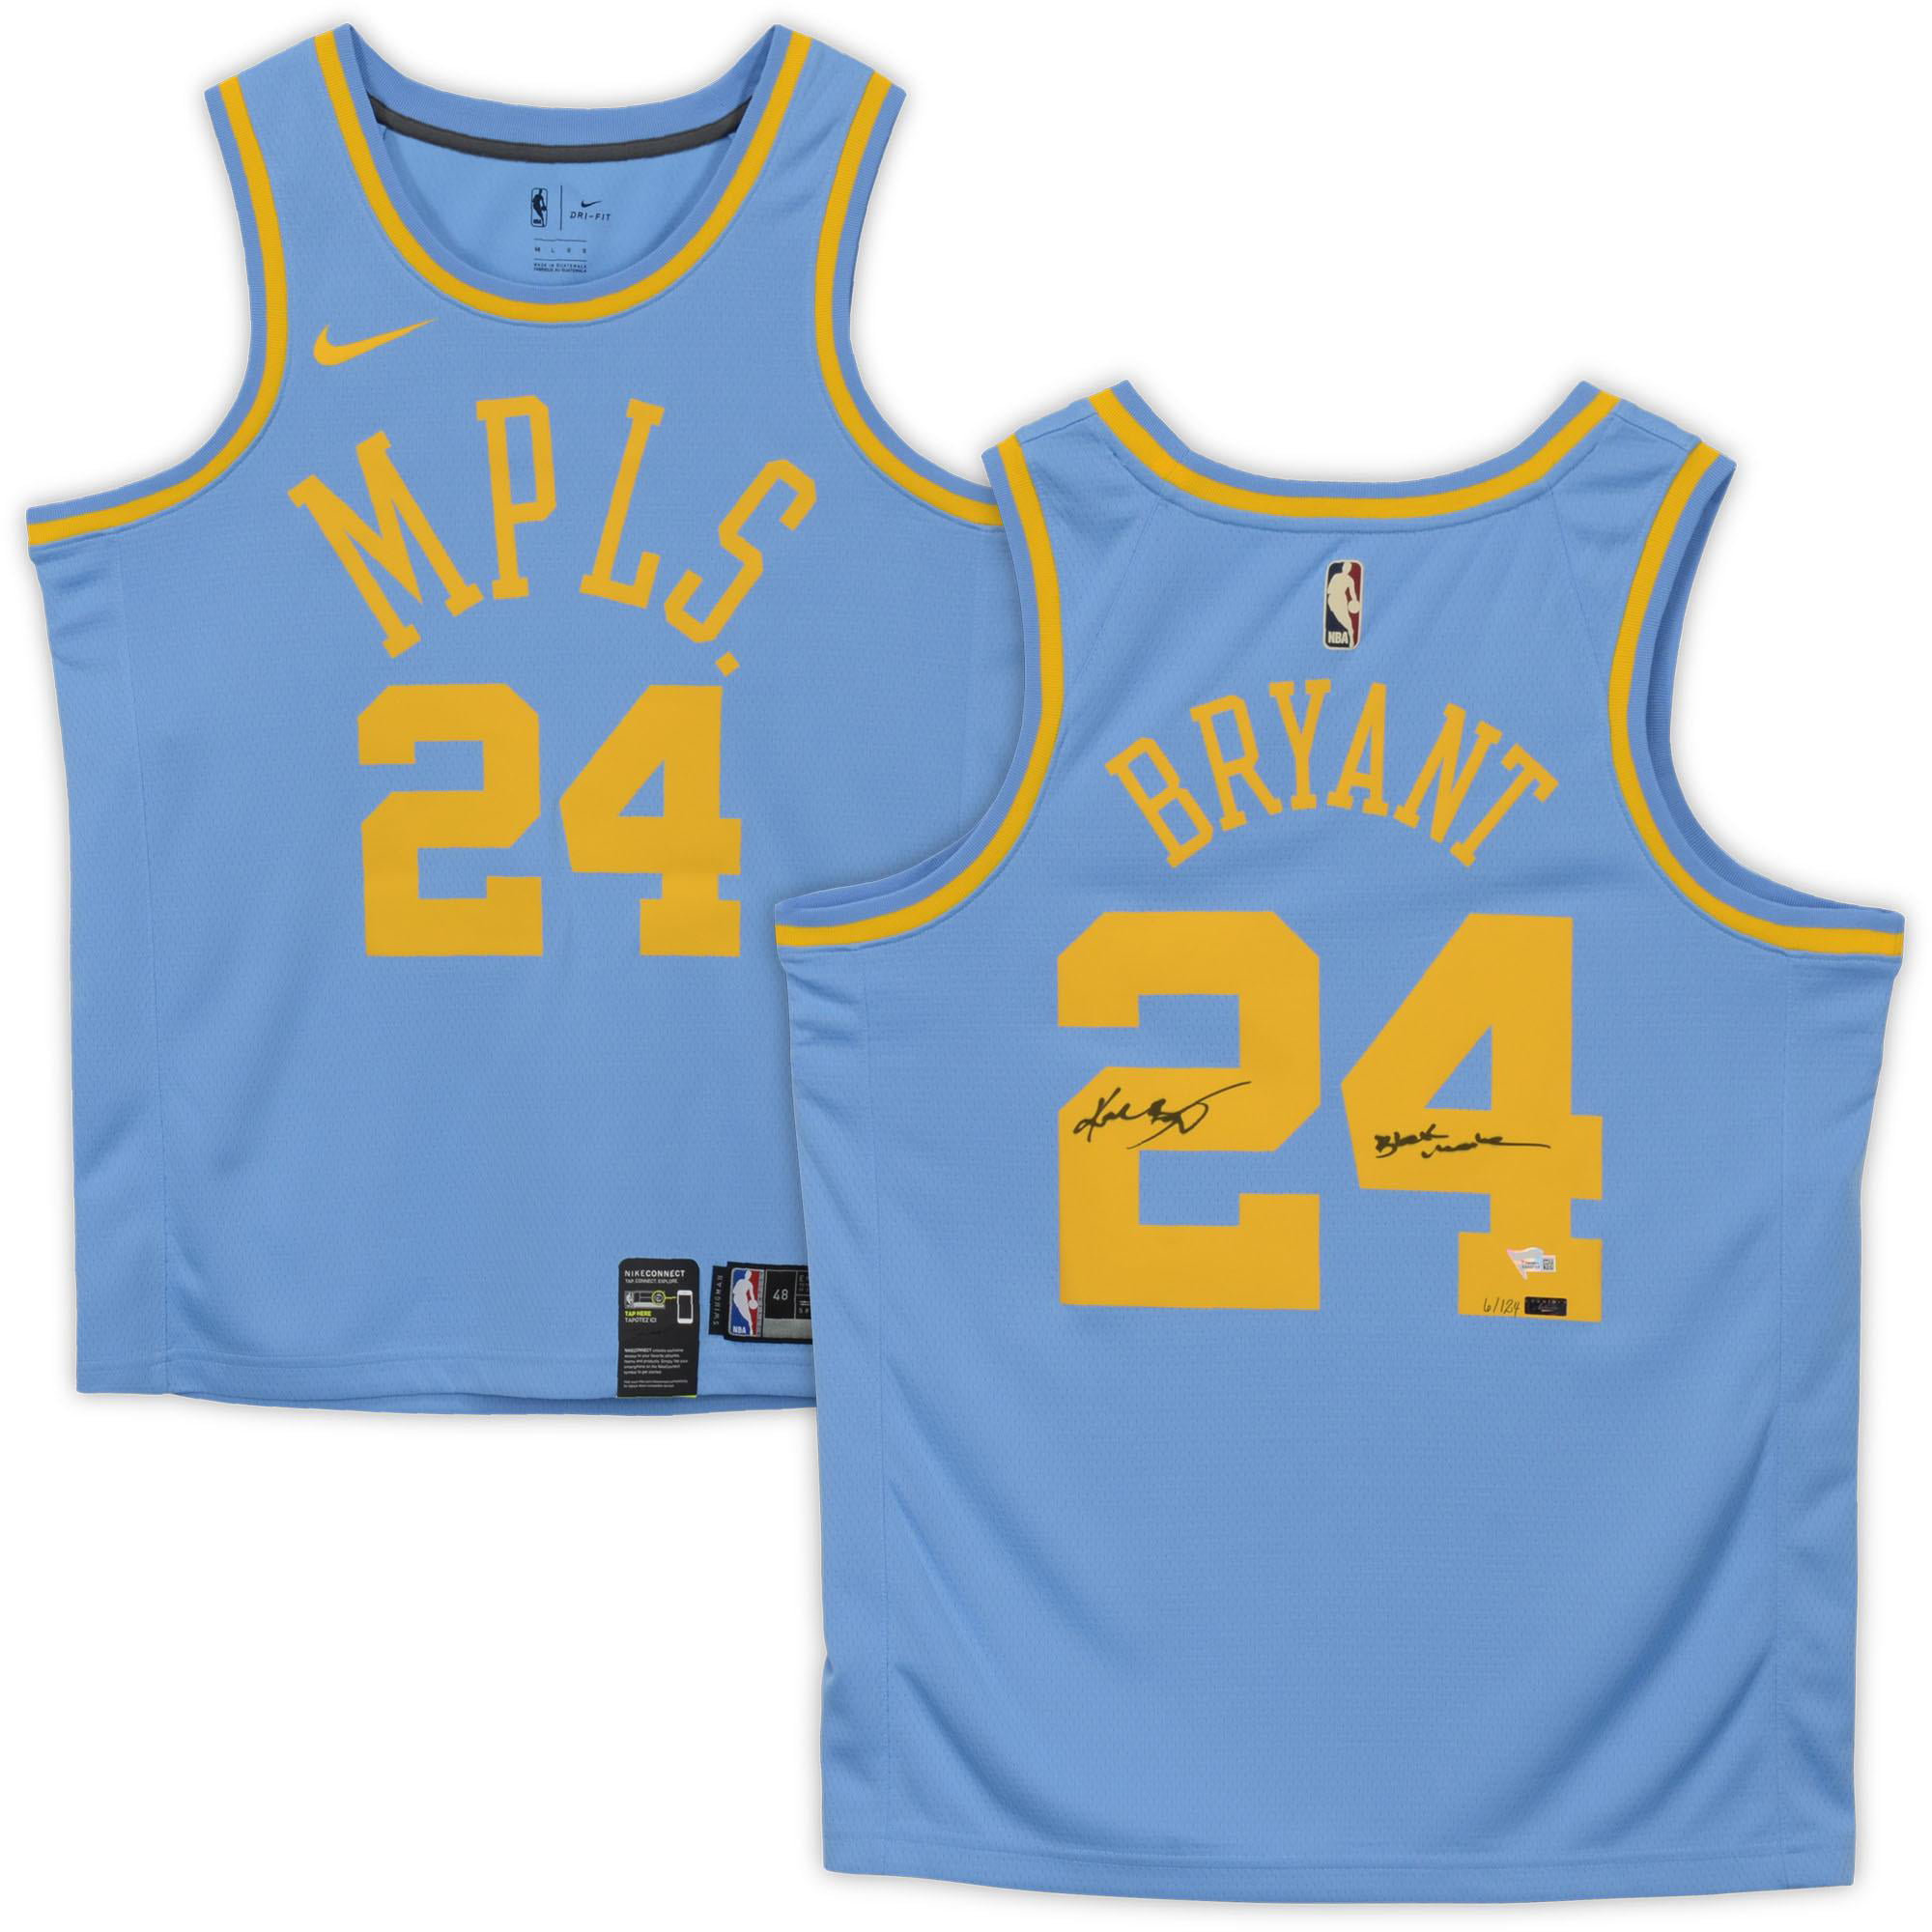 mpls lakers jersey